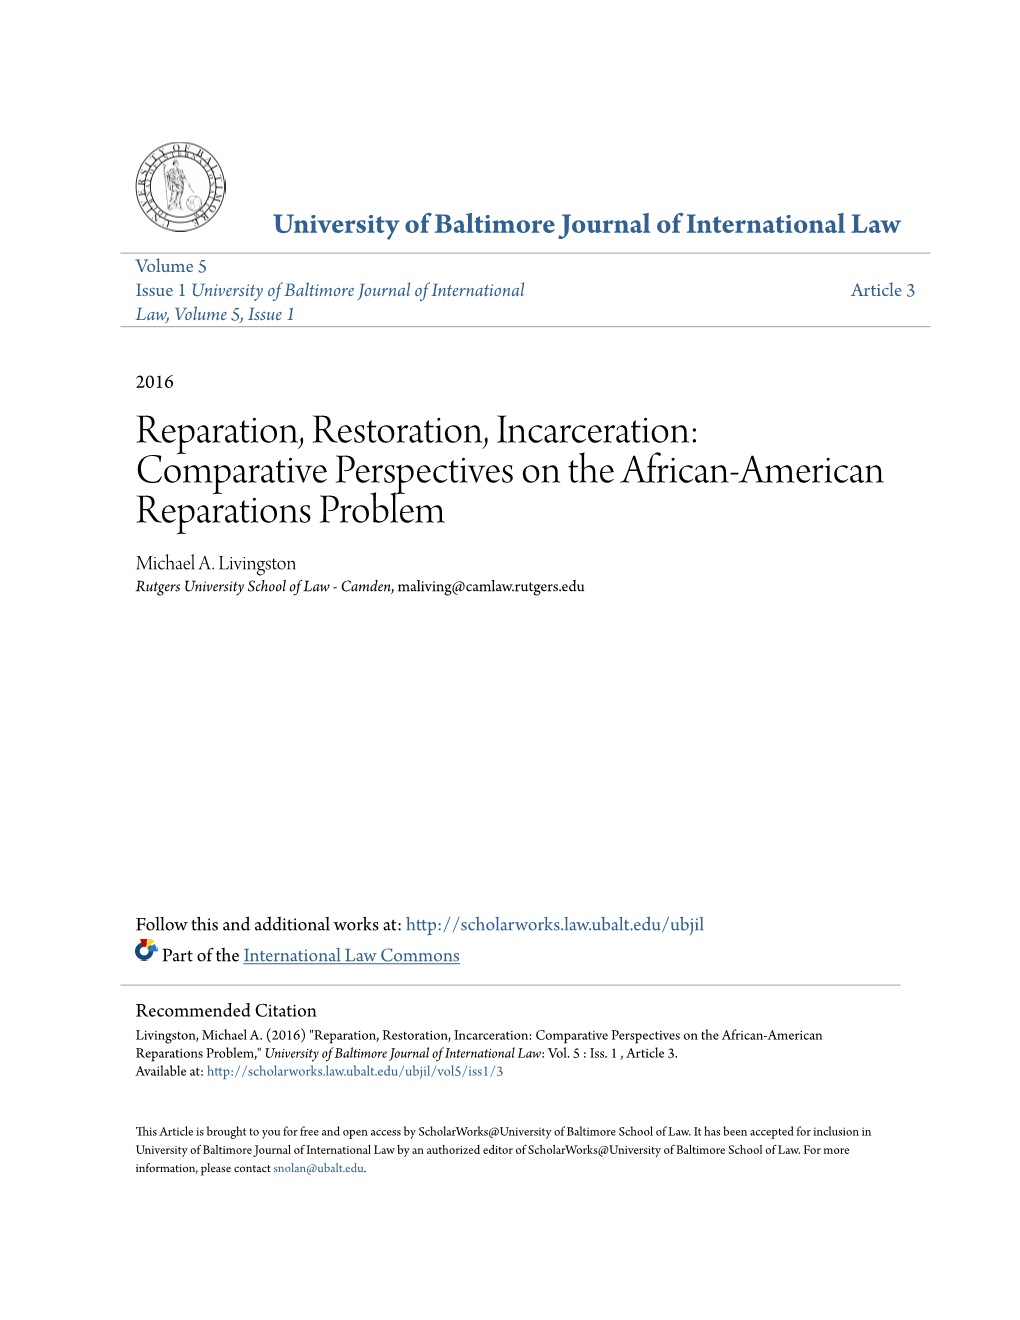 Reparation, Restoration, Incarceration: Comparative Perspectives on the African-American Reparations Problem Michael A